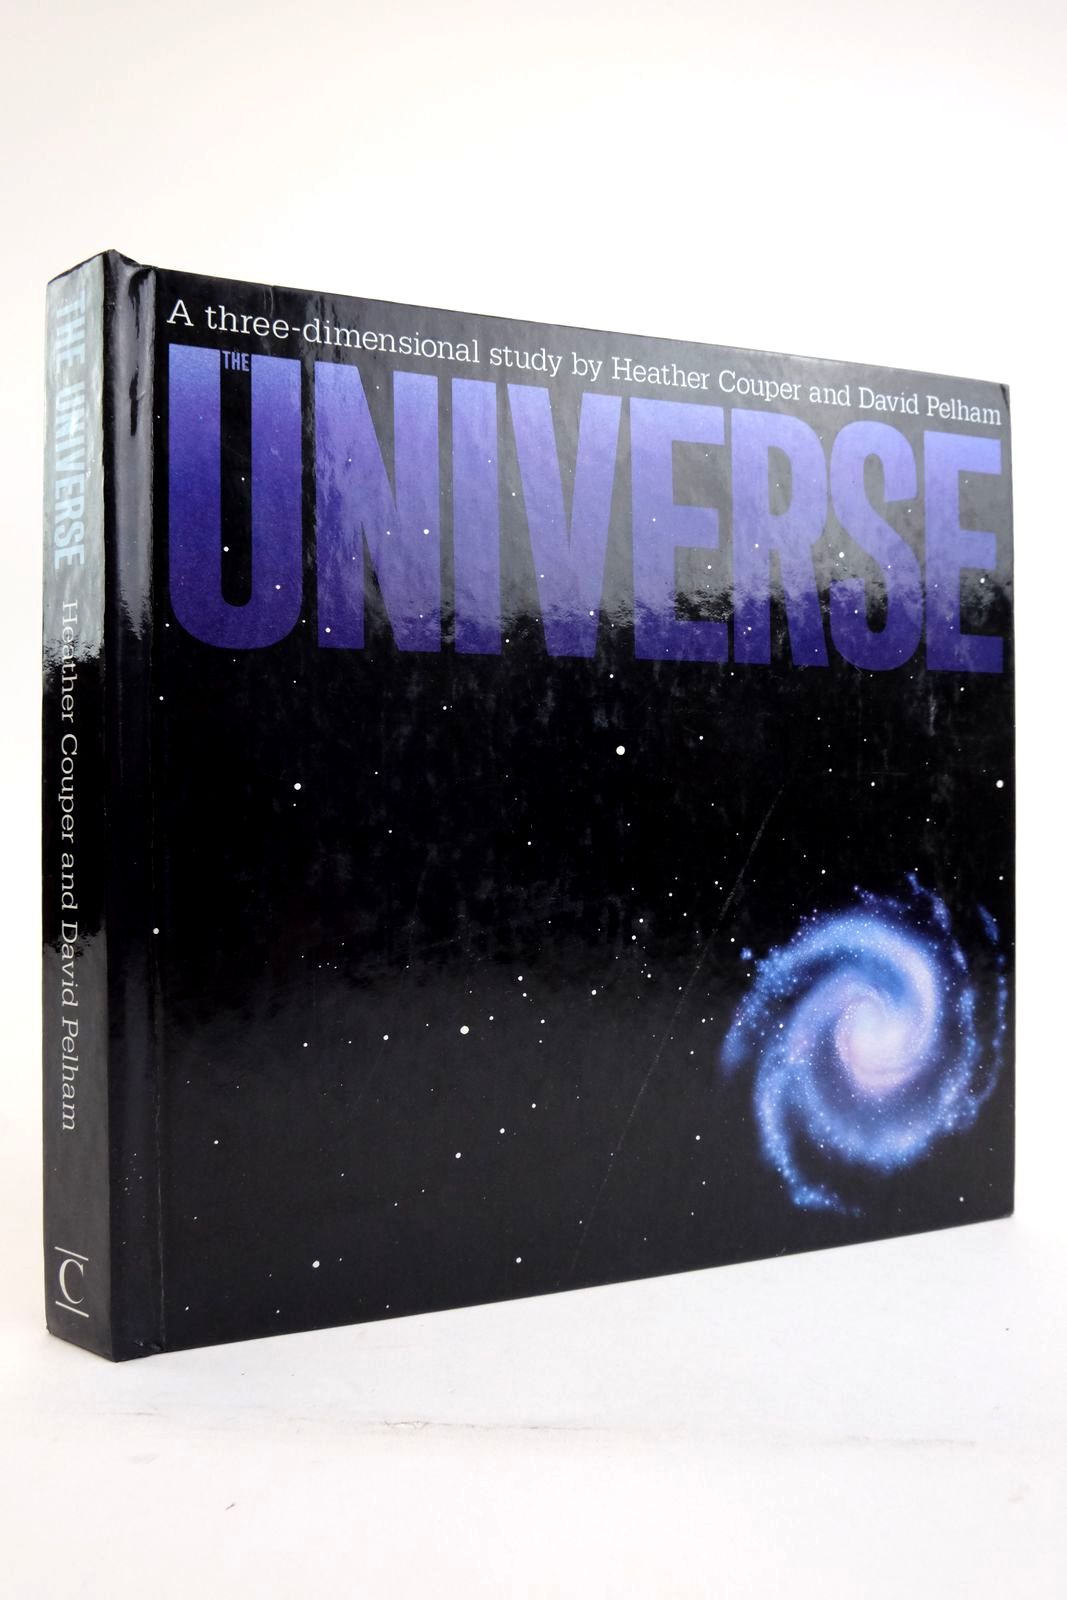 Photo of THE UNIVERSE A THREE-DIMENSIONAL STUDY- Stock Number: 2135891